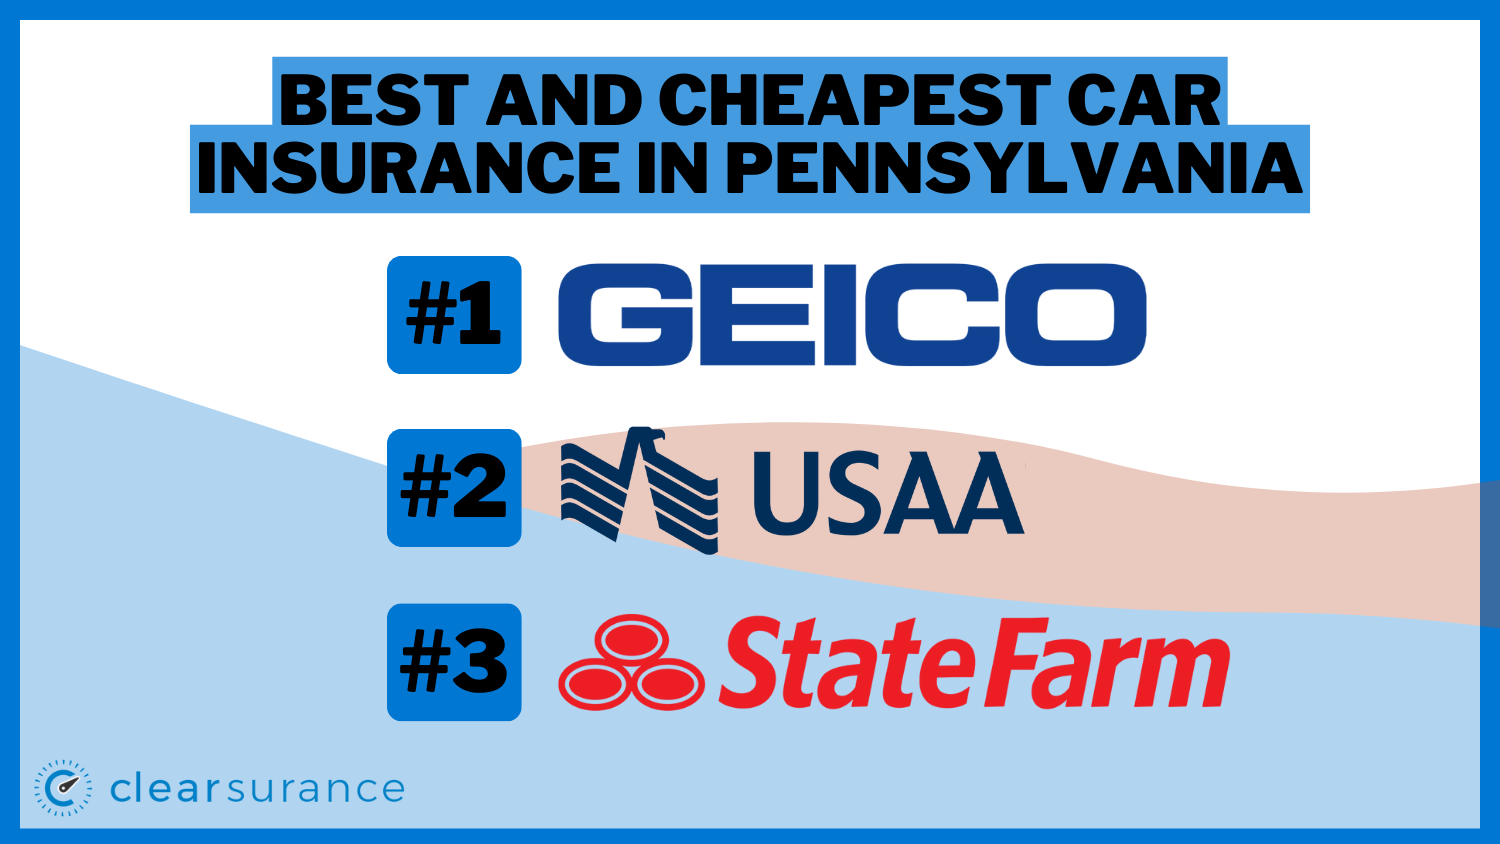 Best and Cheapest Car Insurance in Pennsylvania